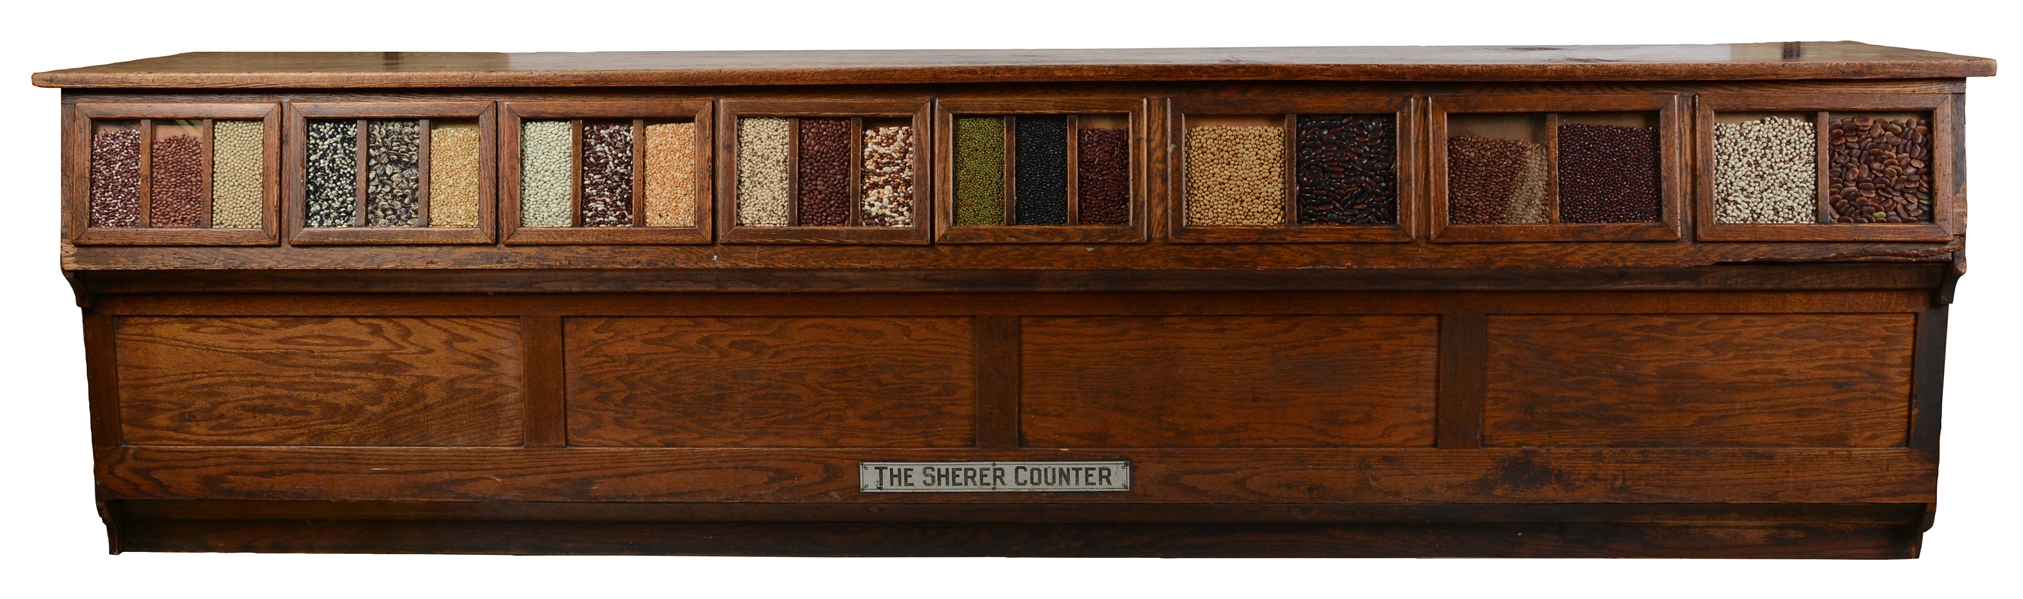 EARLY COUNTRY STORE SHERER BEAN COUNTER.